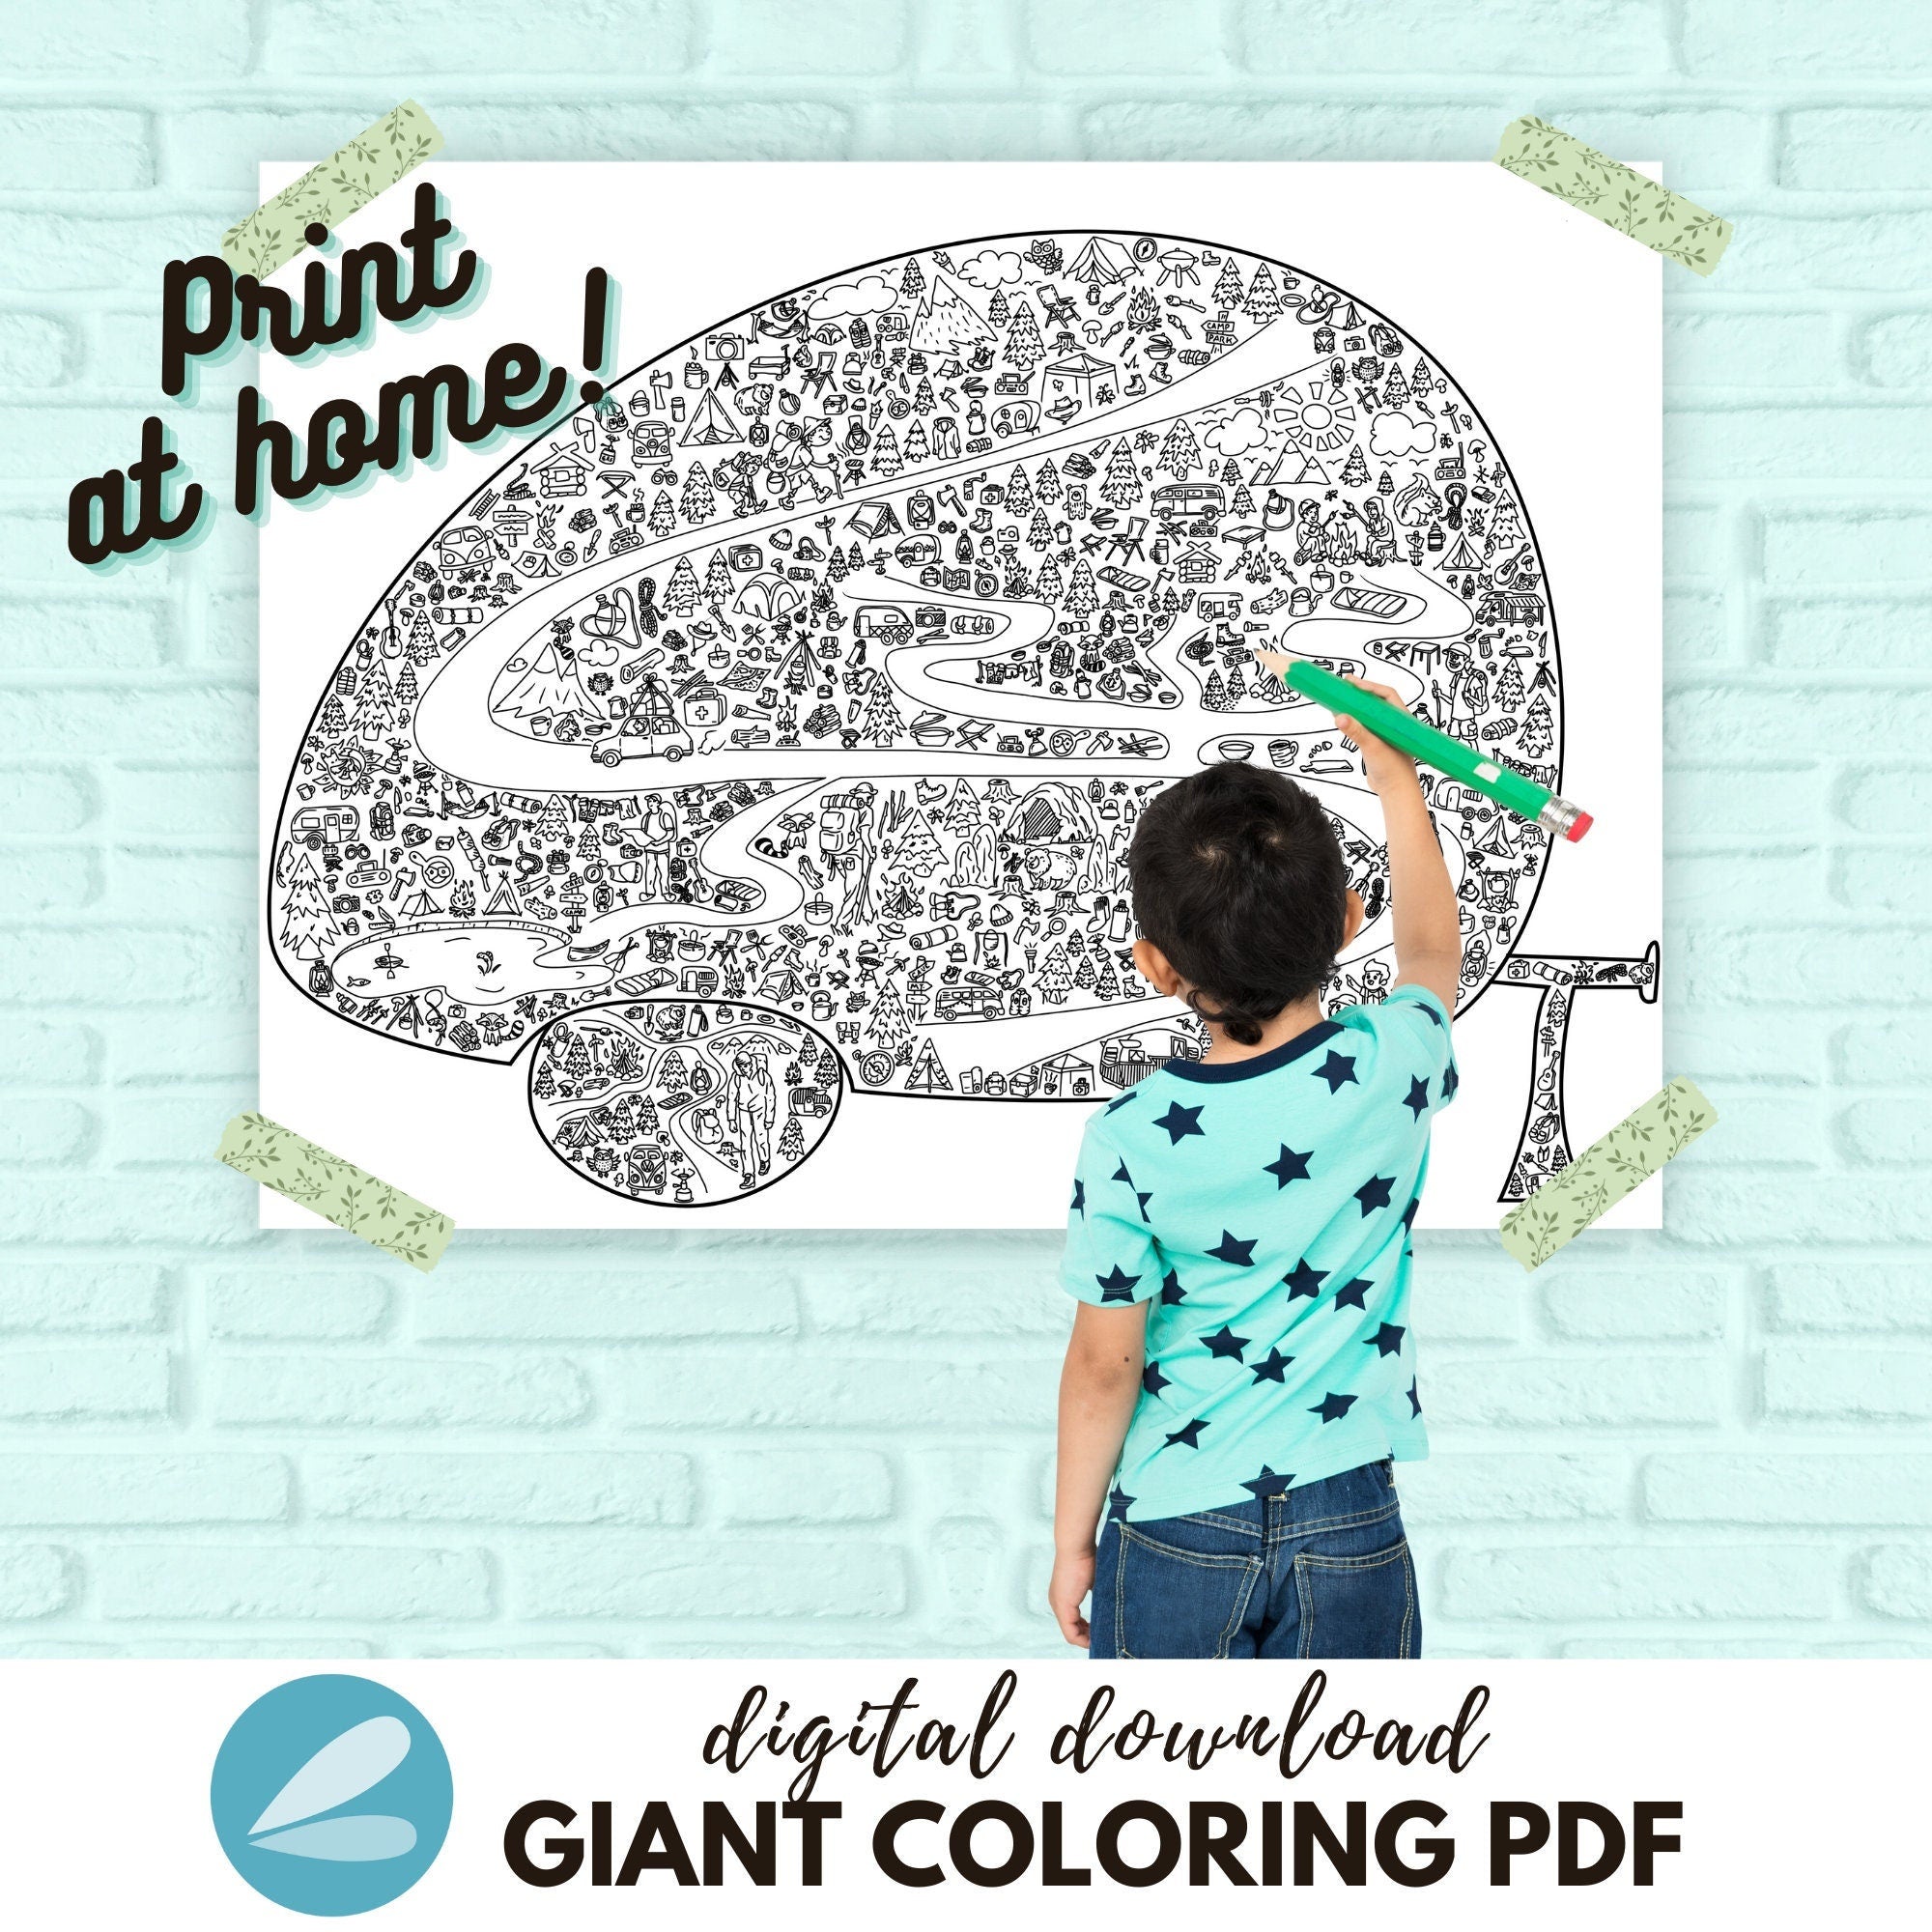 New Jumbo Coloring Poster, Giant Coloring Pages For Kids, Wall